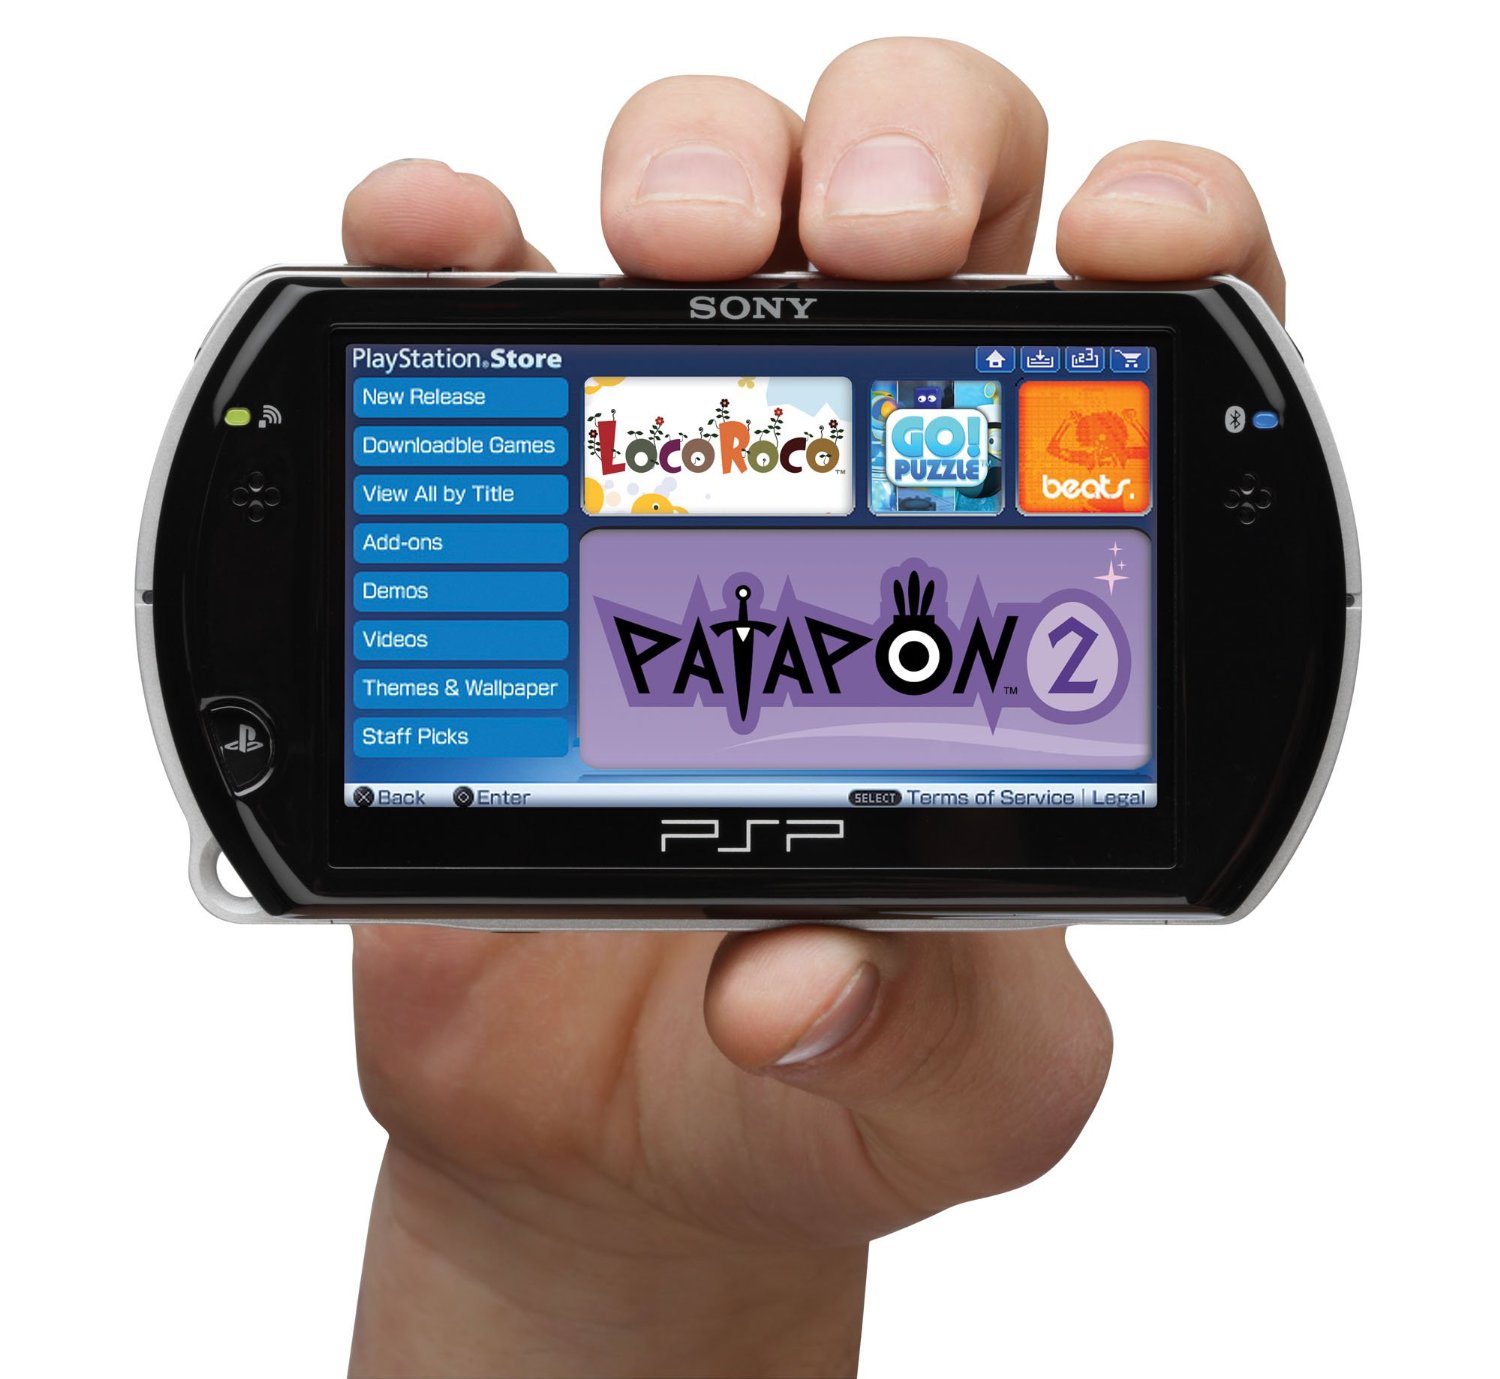 how to use pro psp firmware 6.60